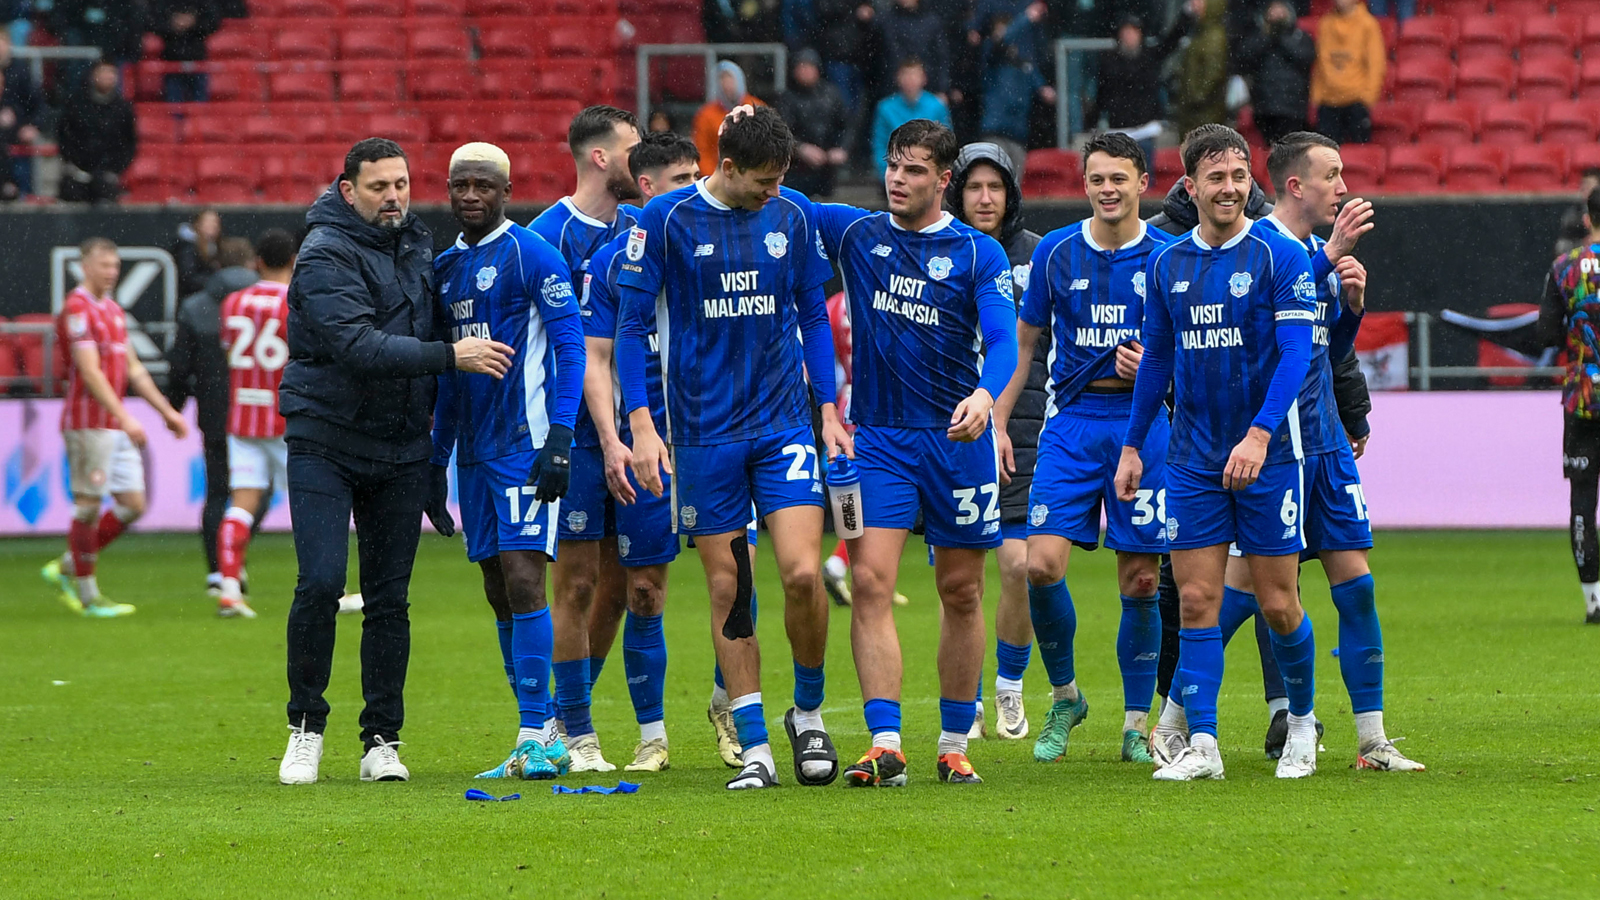 Cardiff City players